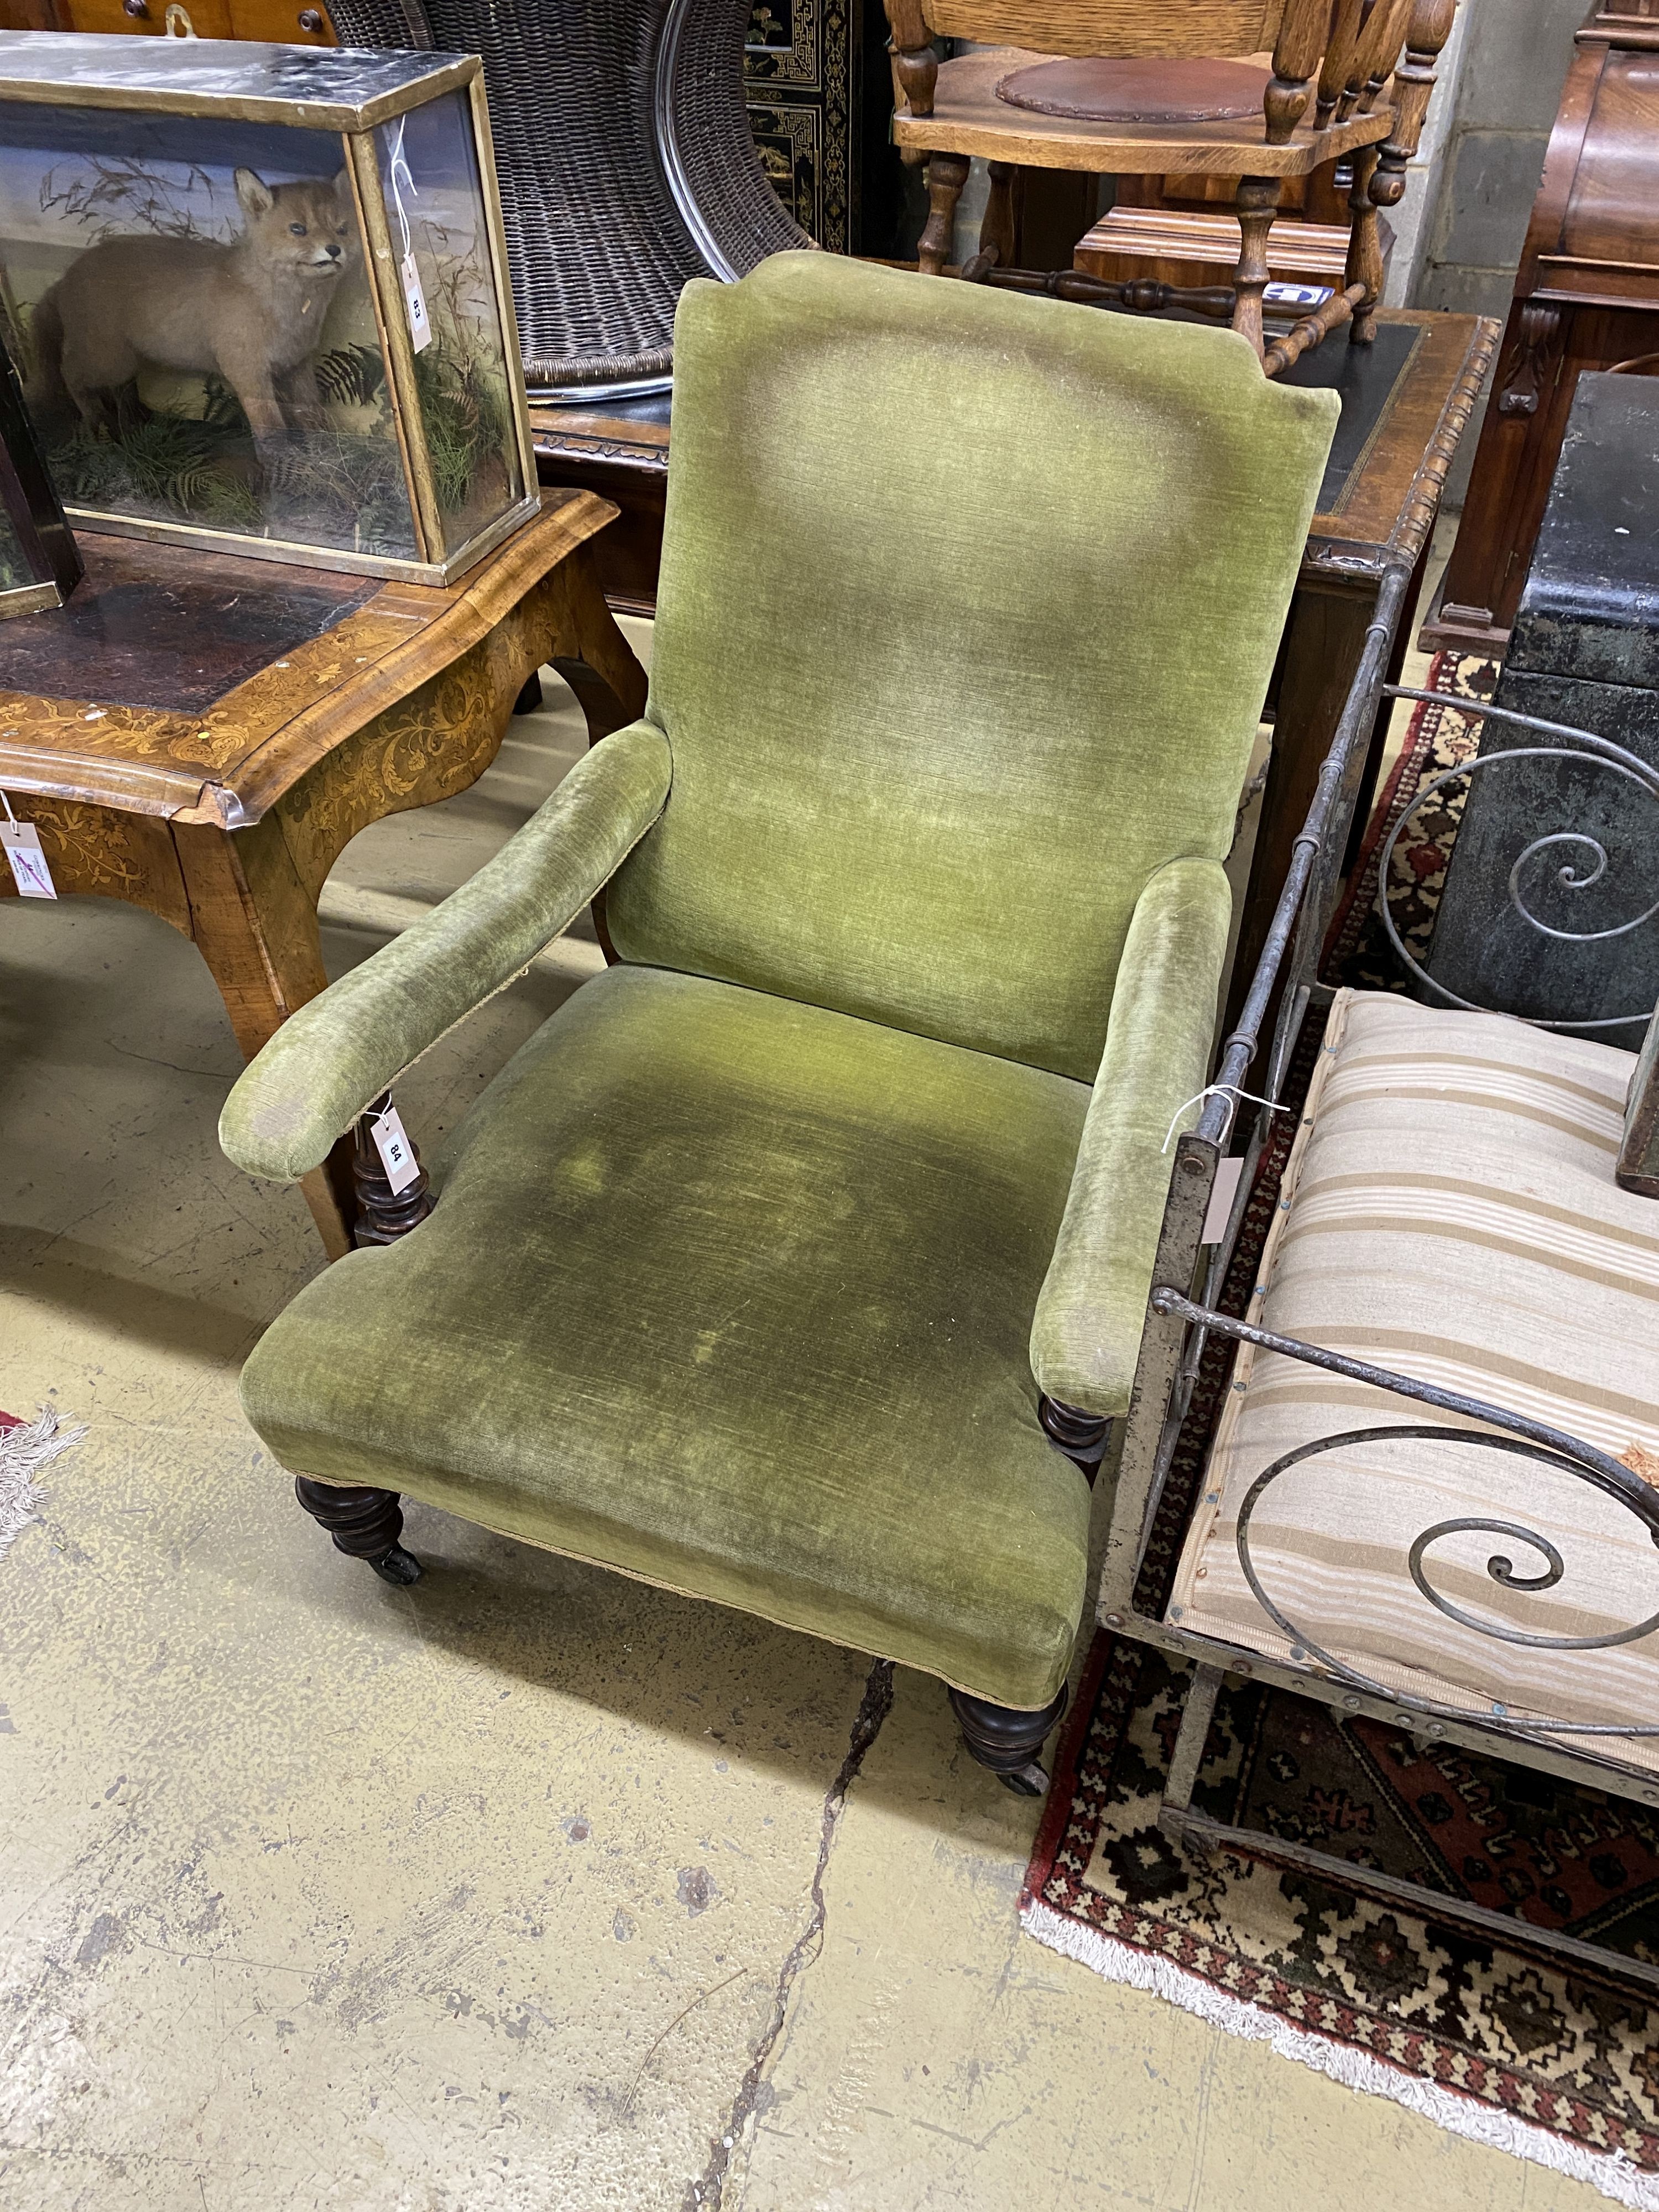 A late Victorian Howard style upholstered open armchair, width 74cm, depth 88cm, height 92cm